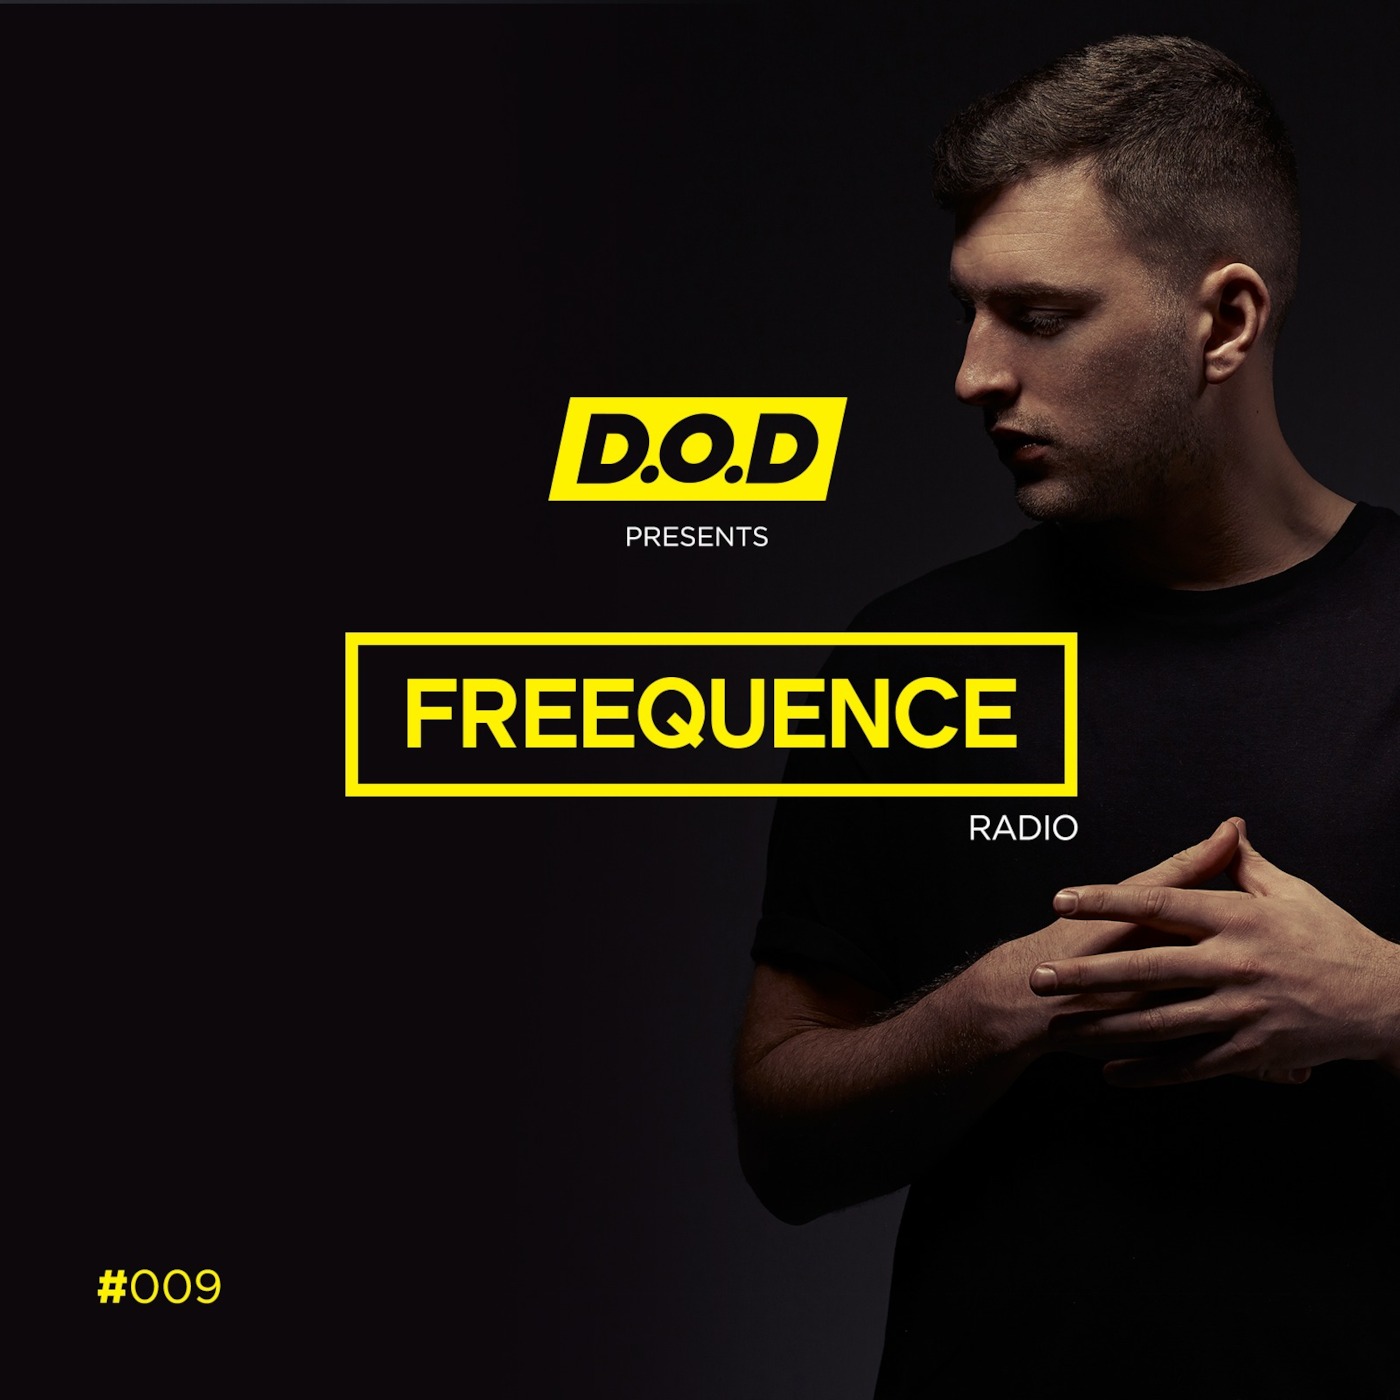 #FREEQUENCE Radio with D.O.D #009